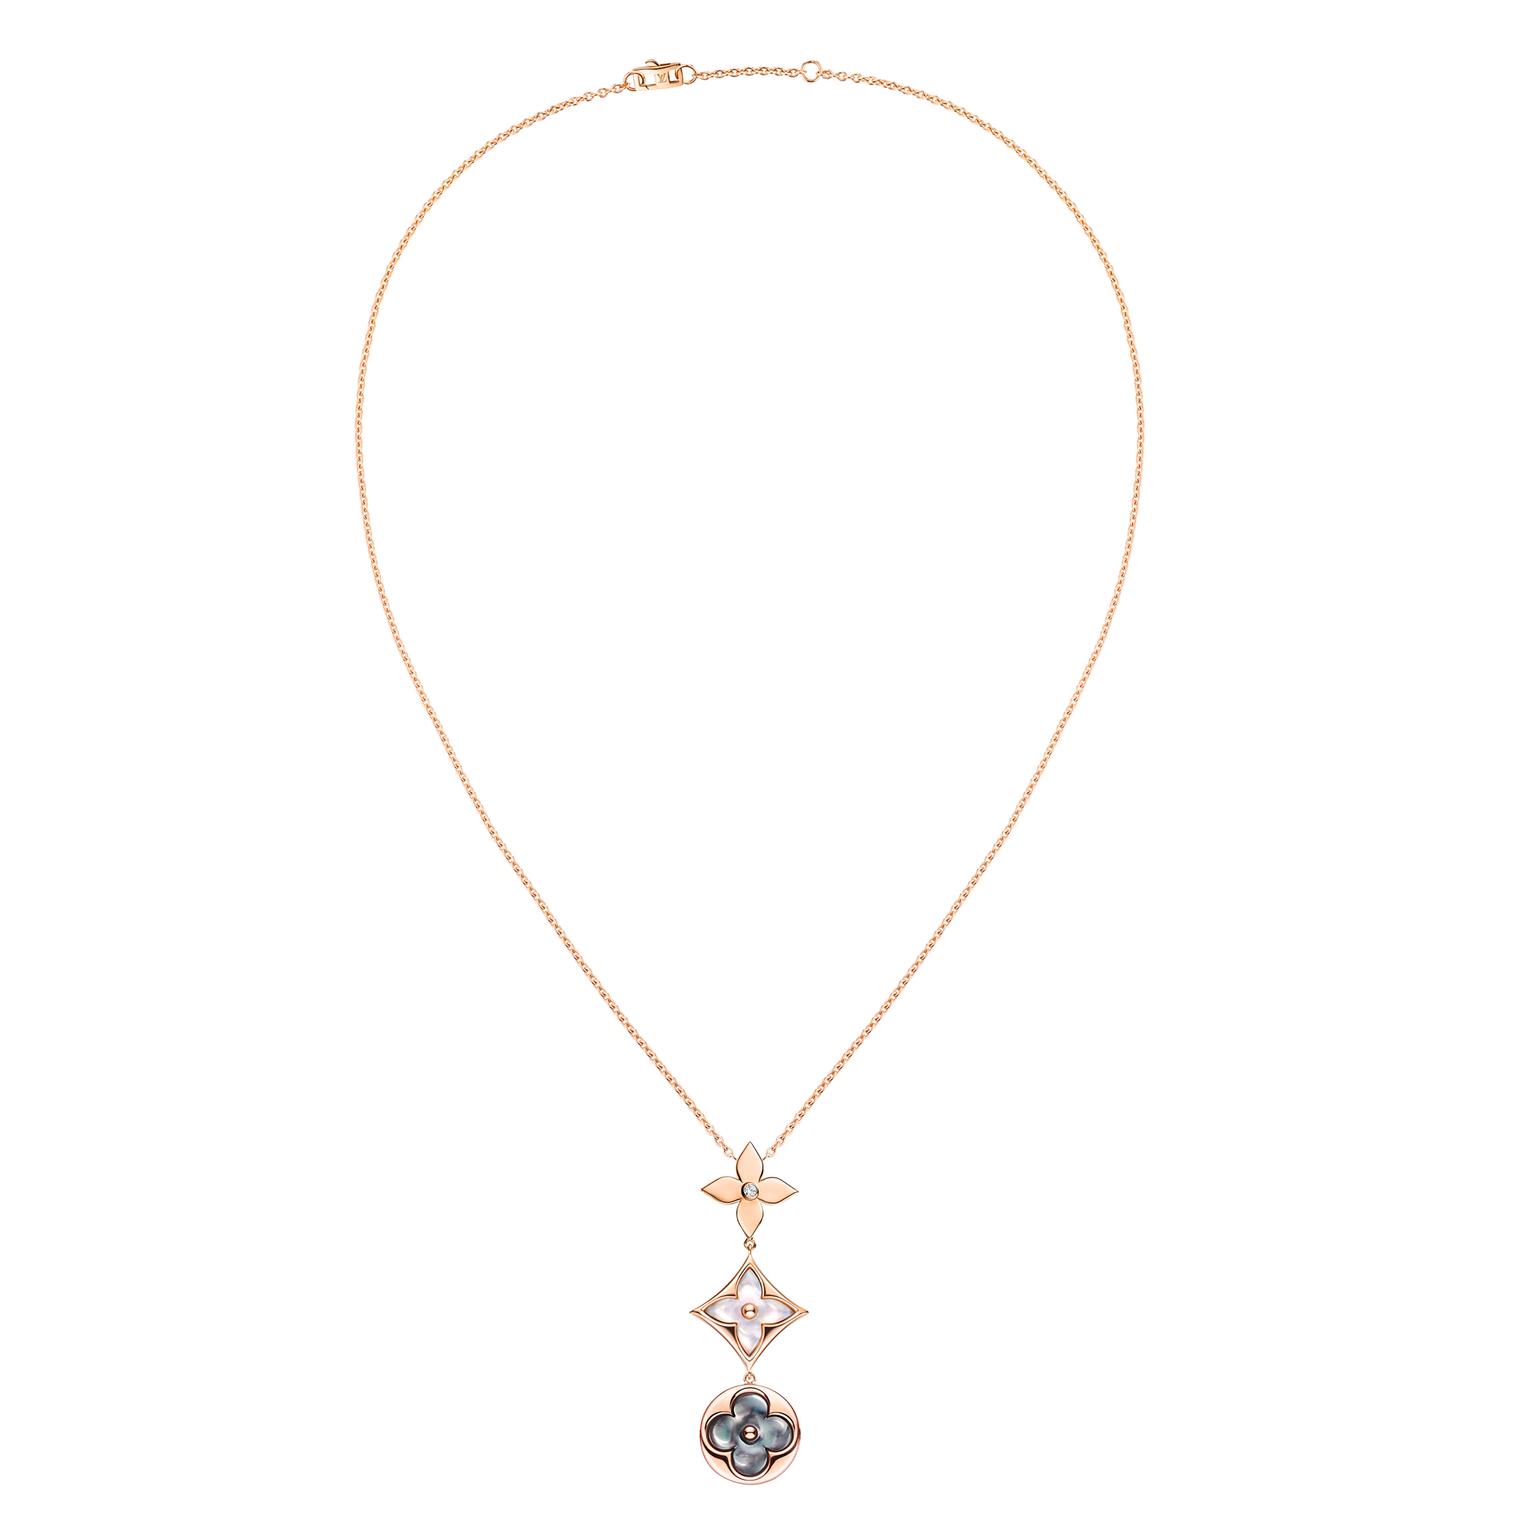 Louis Vuitton jewellery necklace in white and grey mother-of-pearl